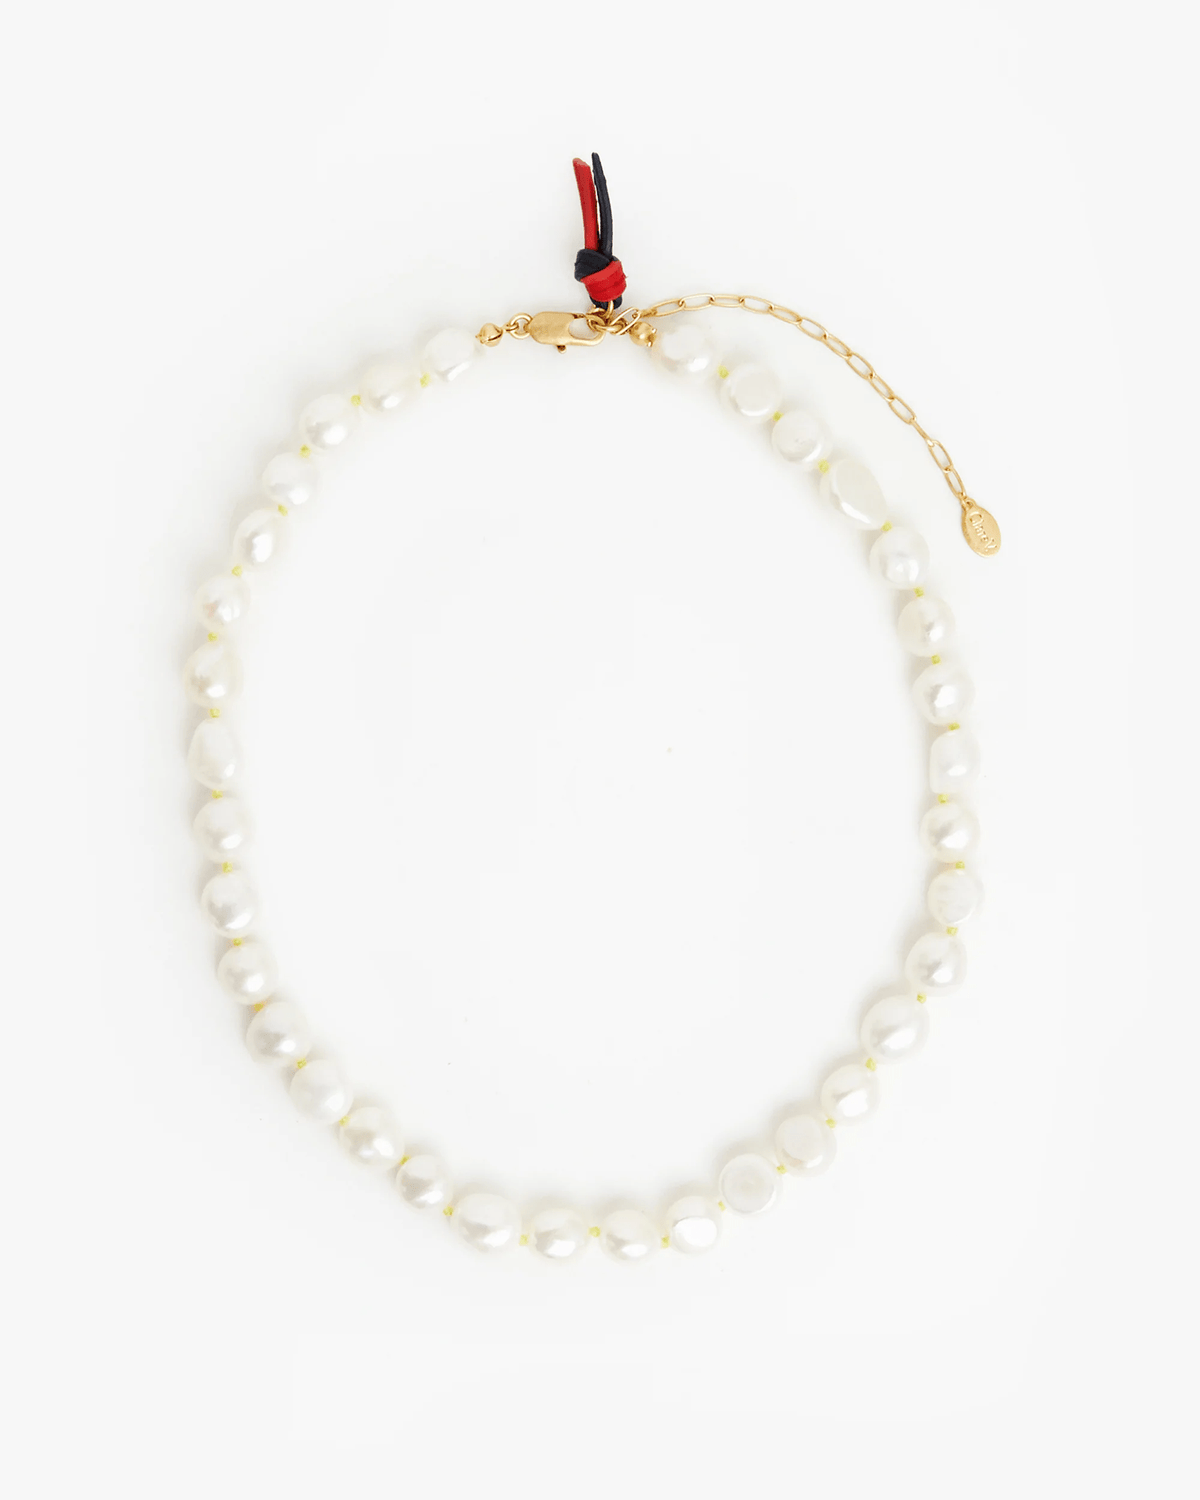 Clare V. Jewelry Freshwater Pearl Necklace in Cream/Neon Yellow Knots